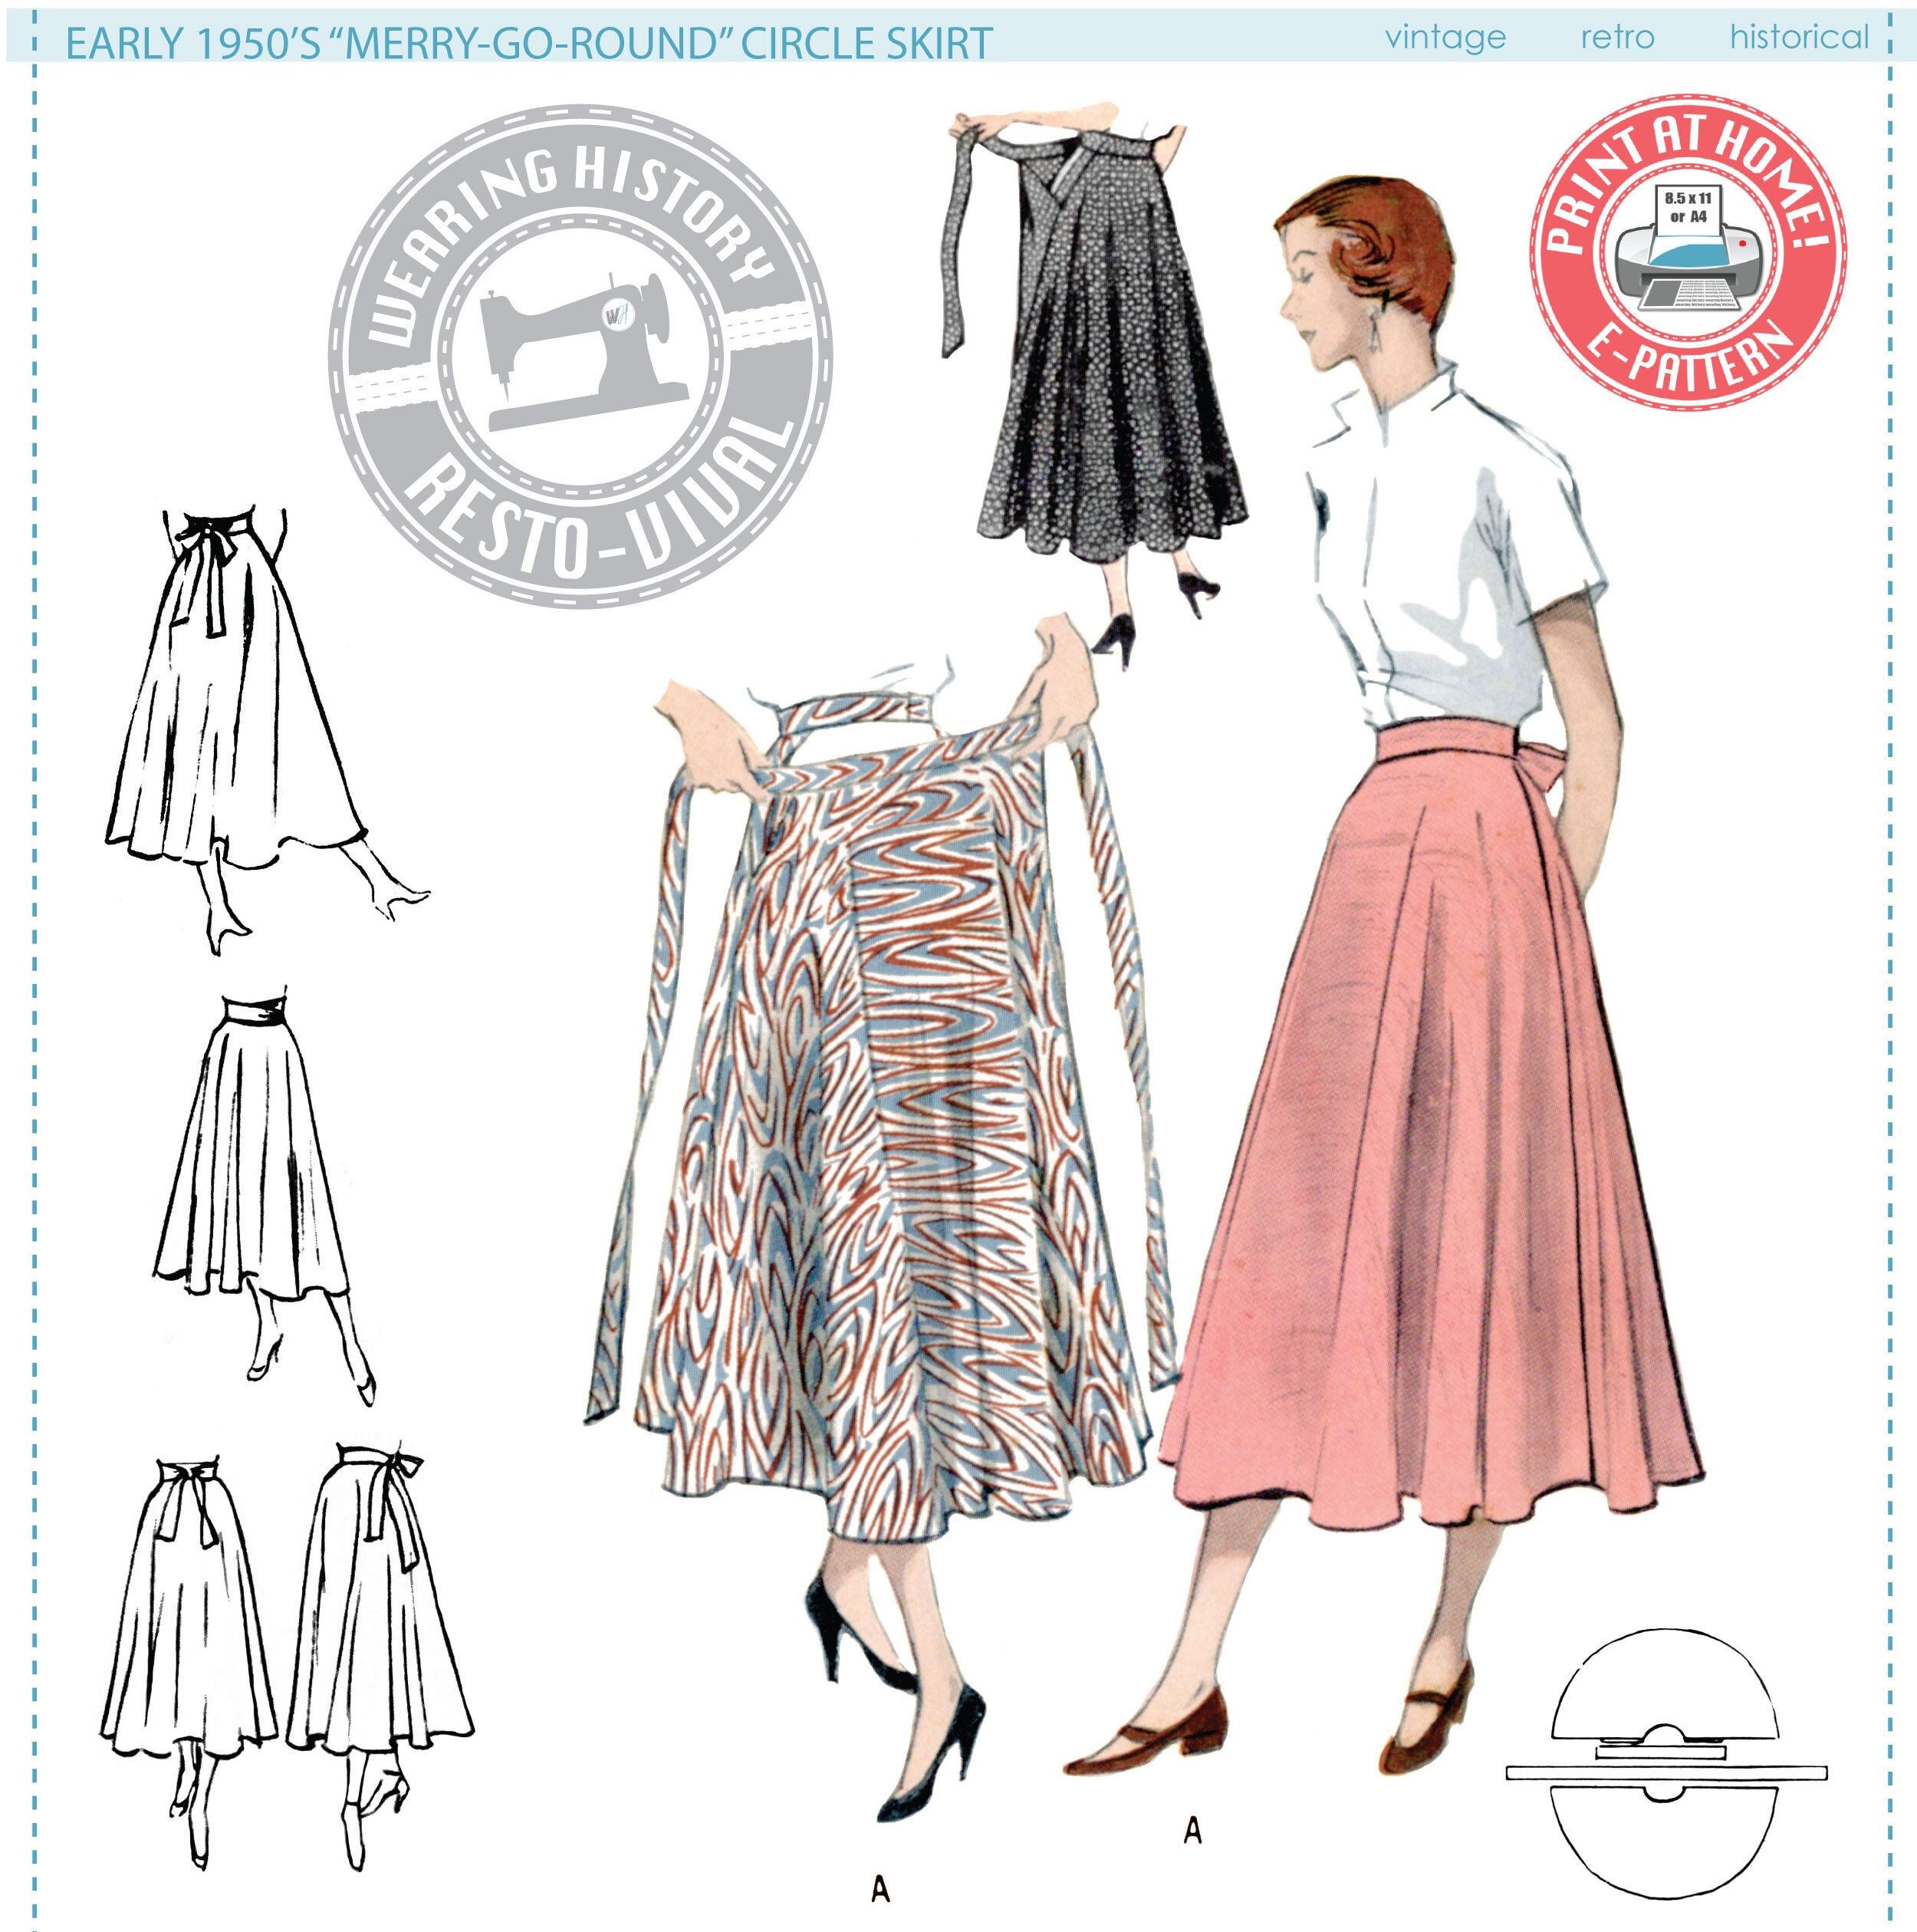 Sew Chic Pattern Company: Copy your Figure: A Dressform Tutorial part 3